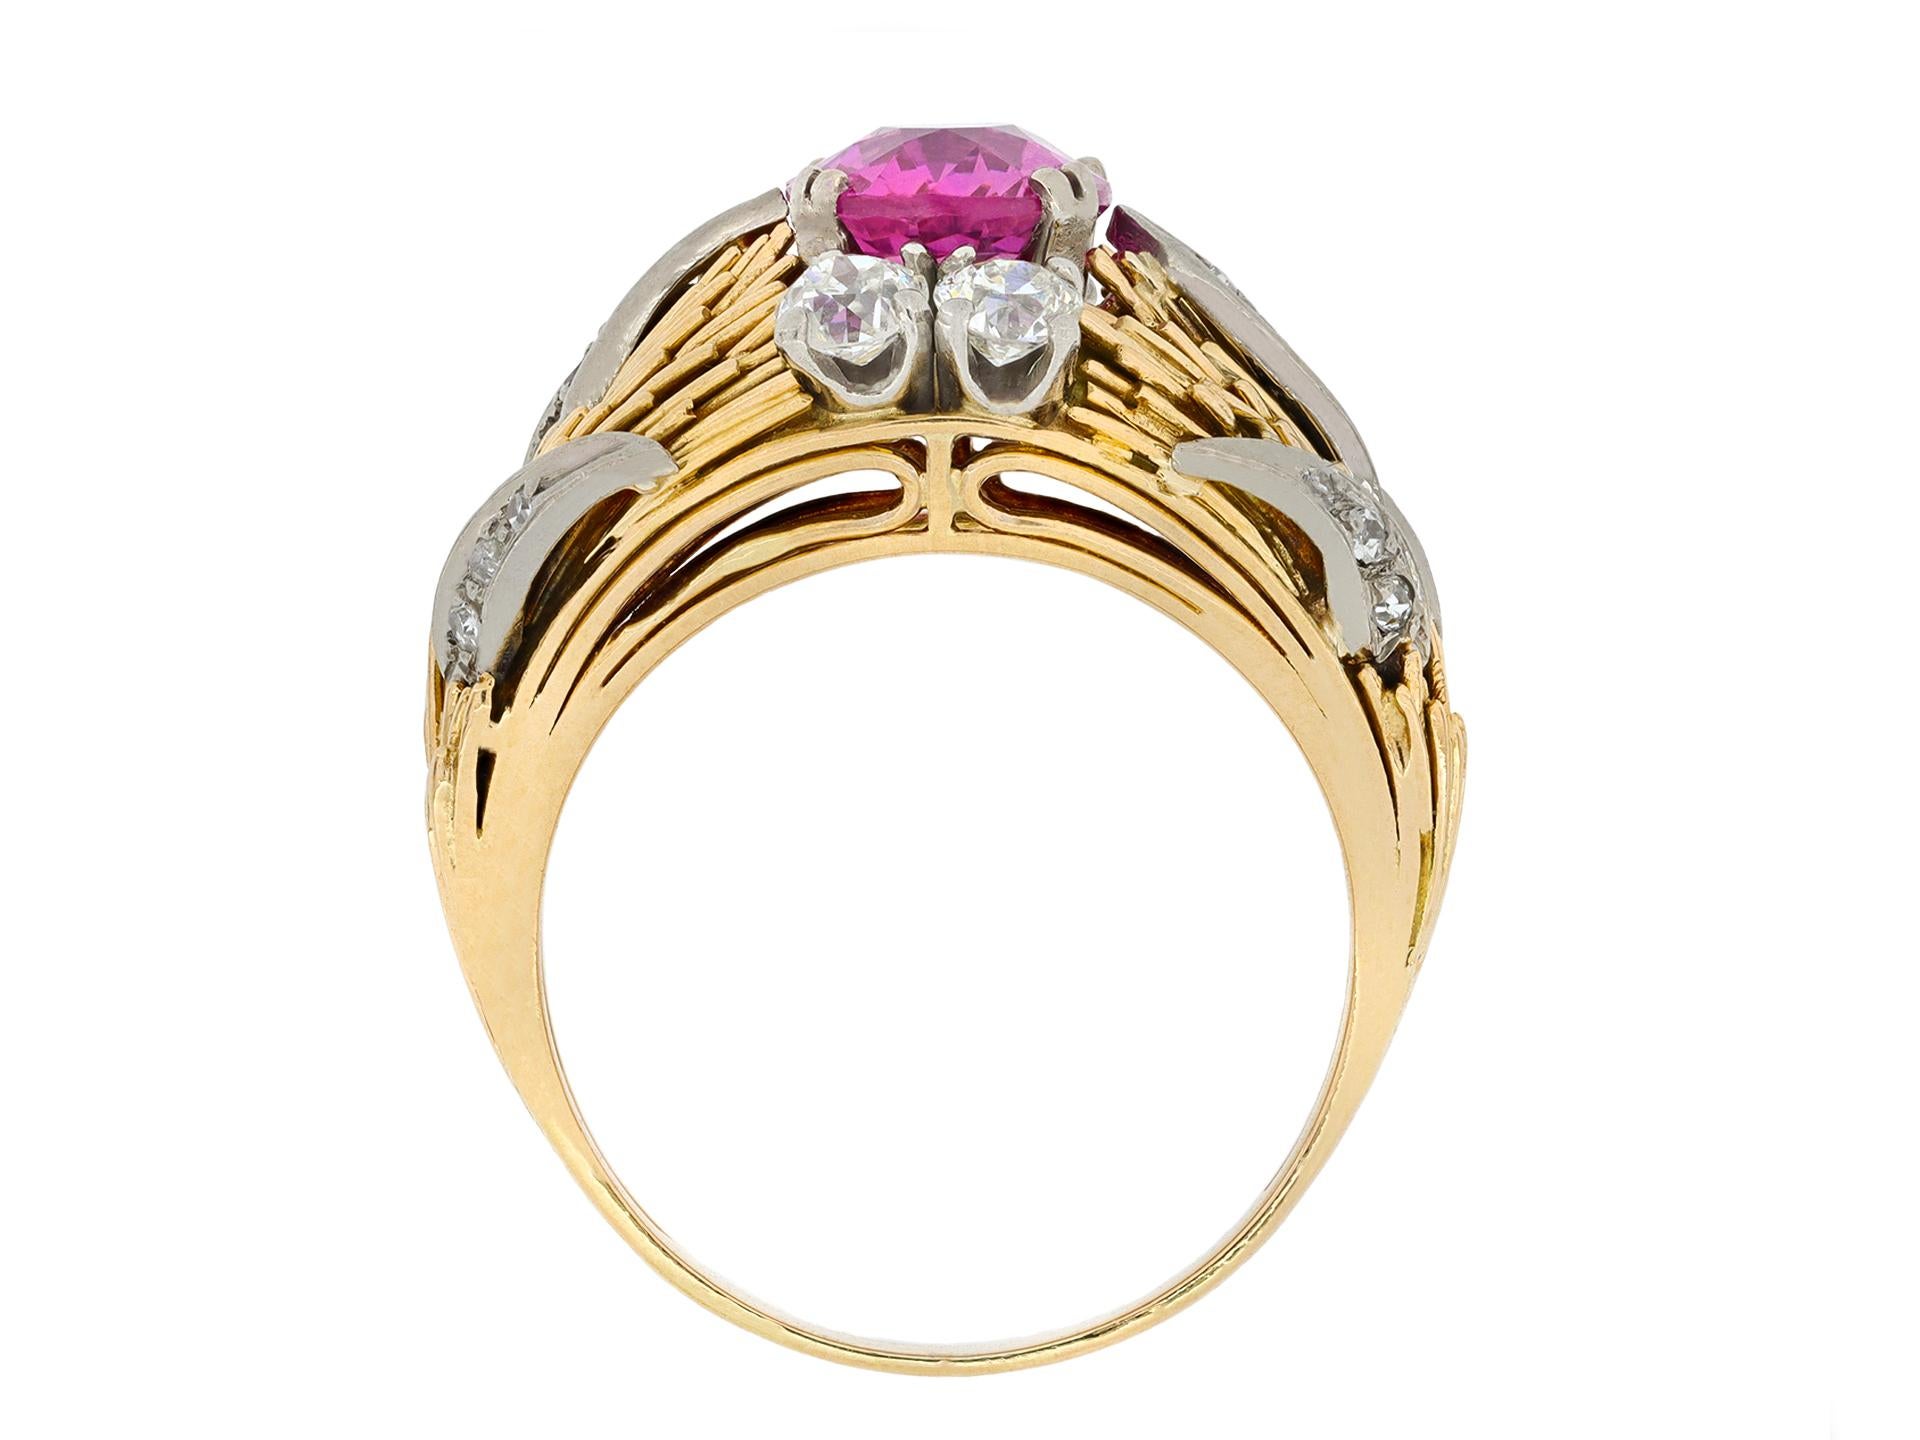 Pink sapphire and diamond cluster ring. Set to centre with a cushion shape brilliant cut natural unenhanced pink Mozambique sapphire in an open back claw setting with an approximate weight of 2.30 carats, flanked by four round old cut diamonds in